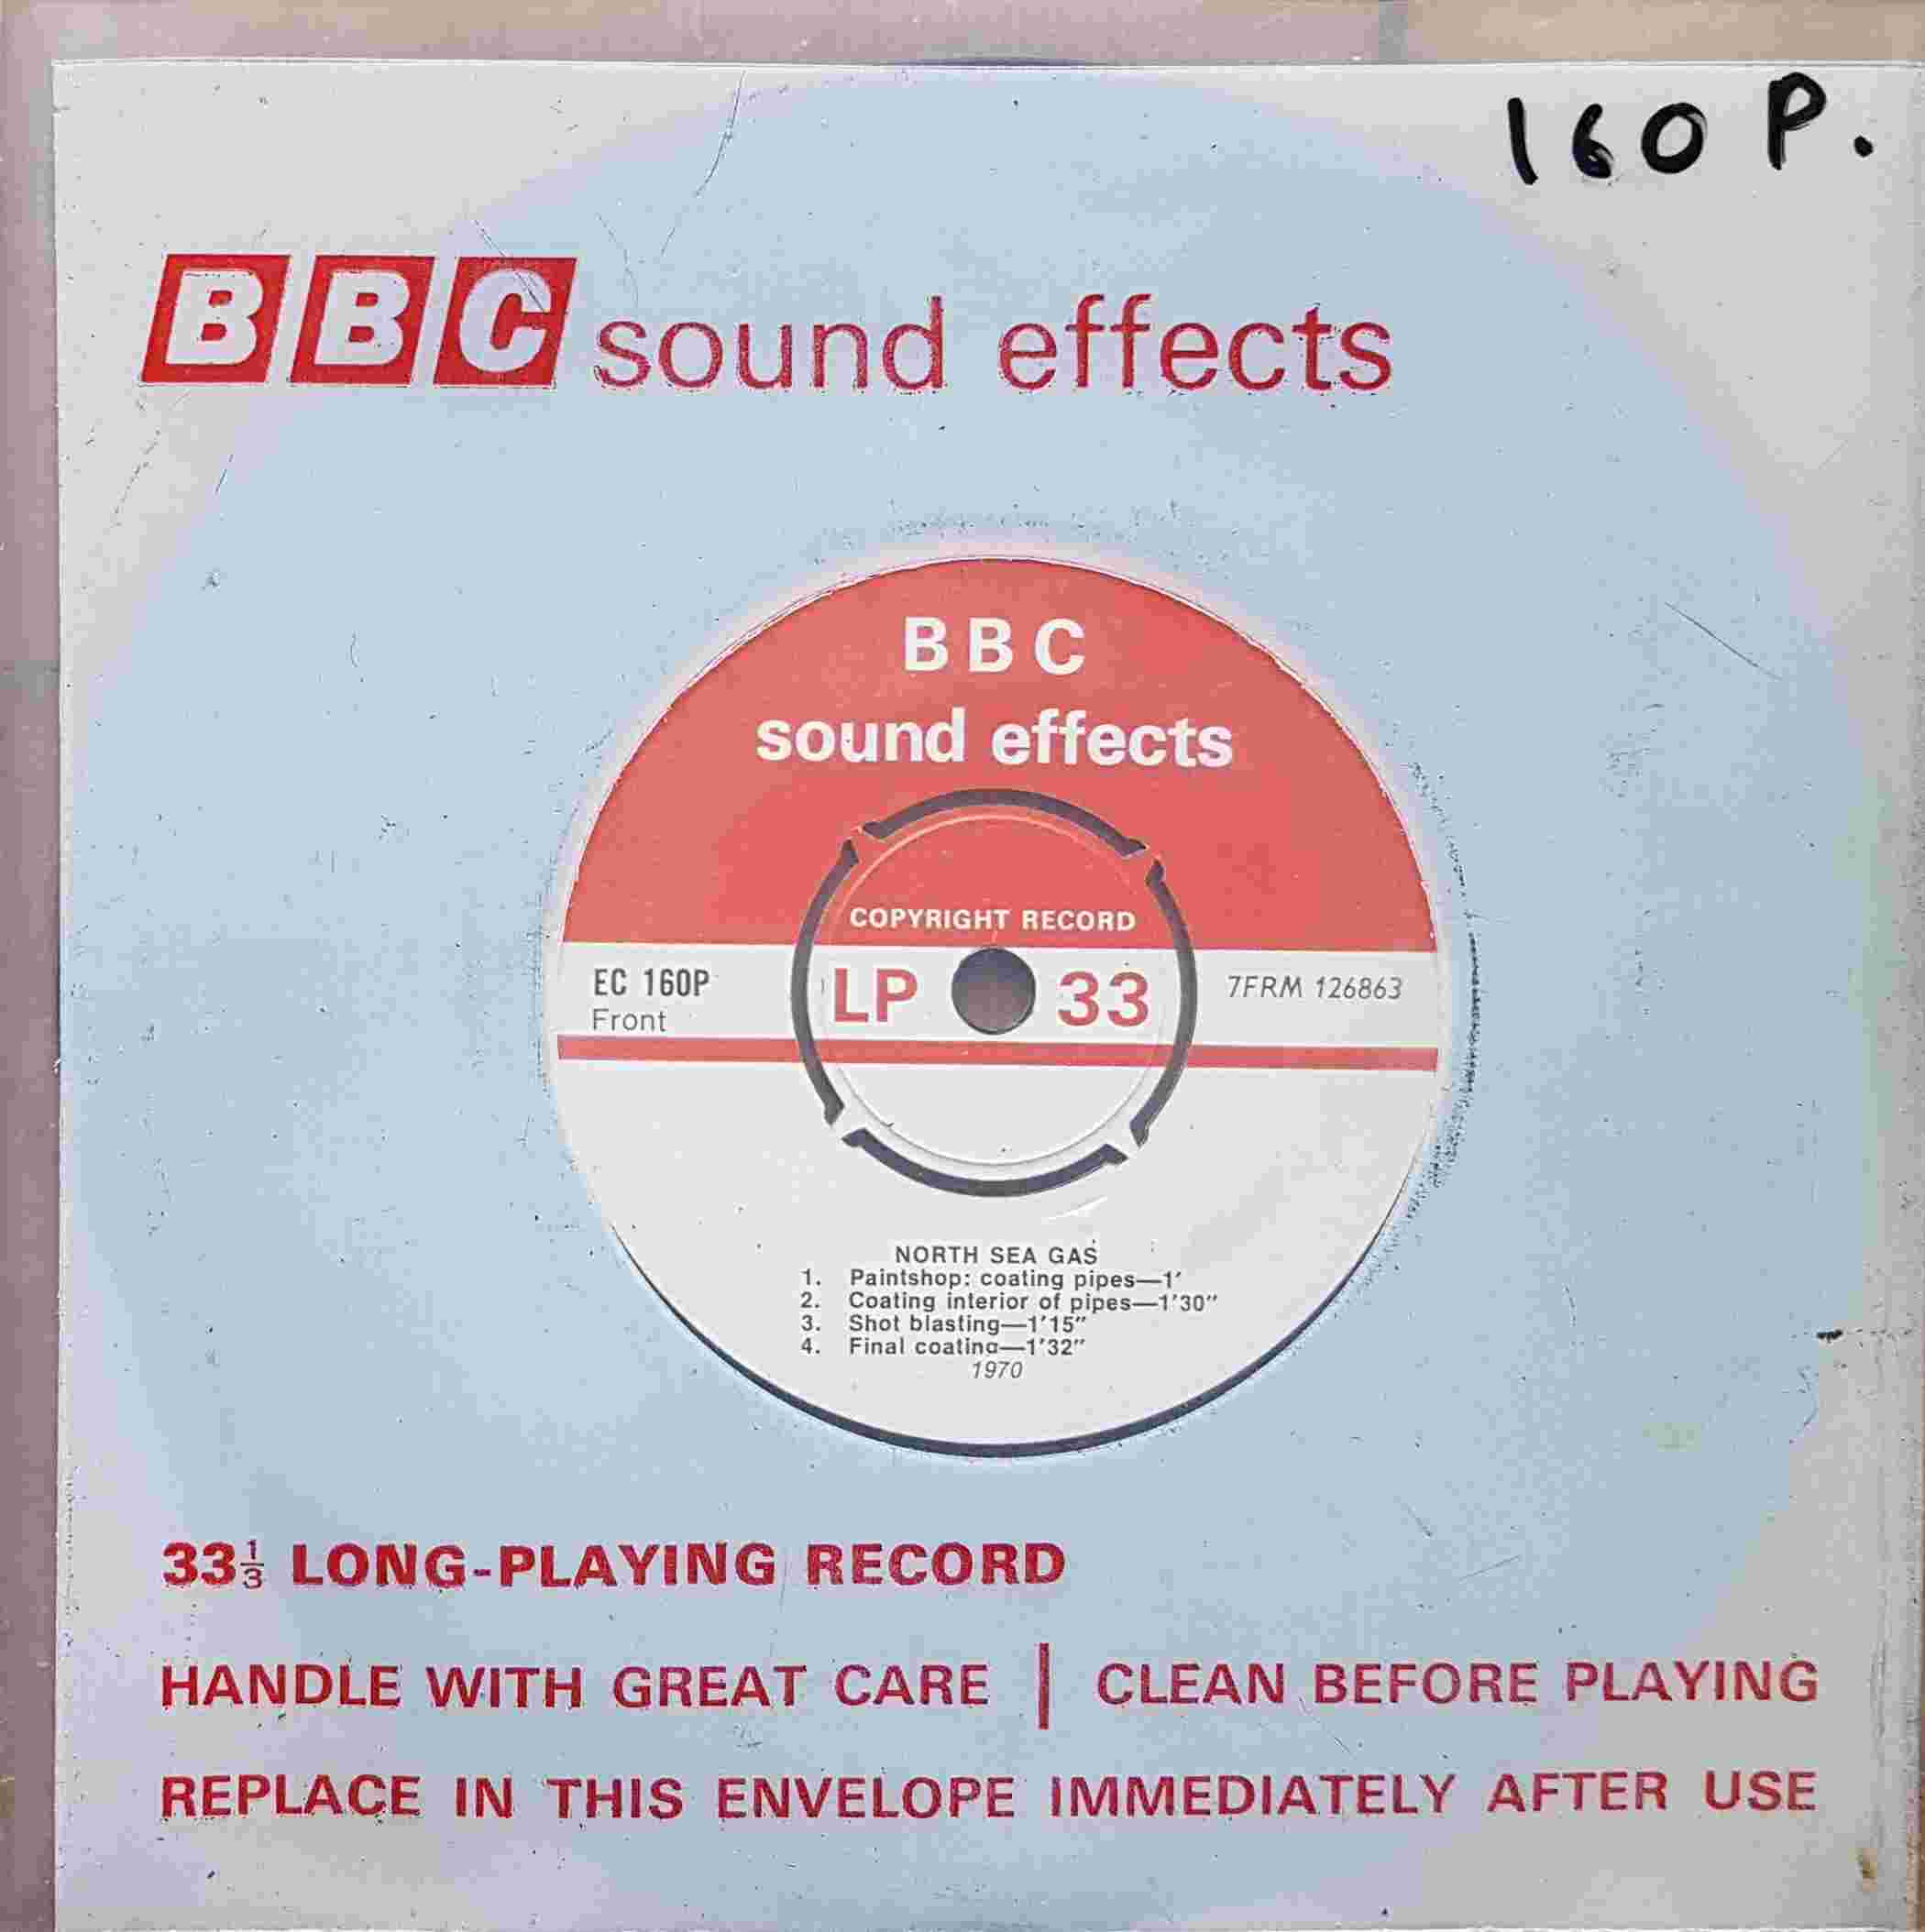 Picture of EC 160P North Sea gas by artist Not registered from the BBC records and Tapes library